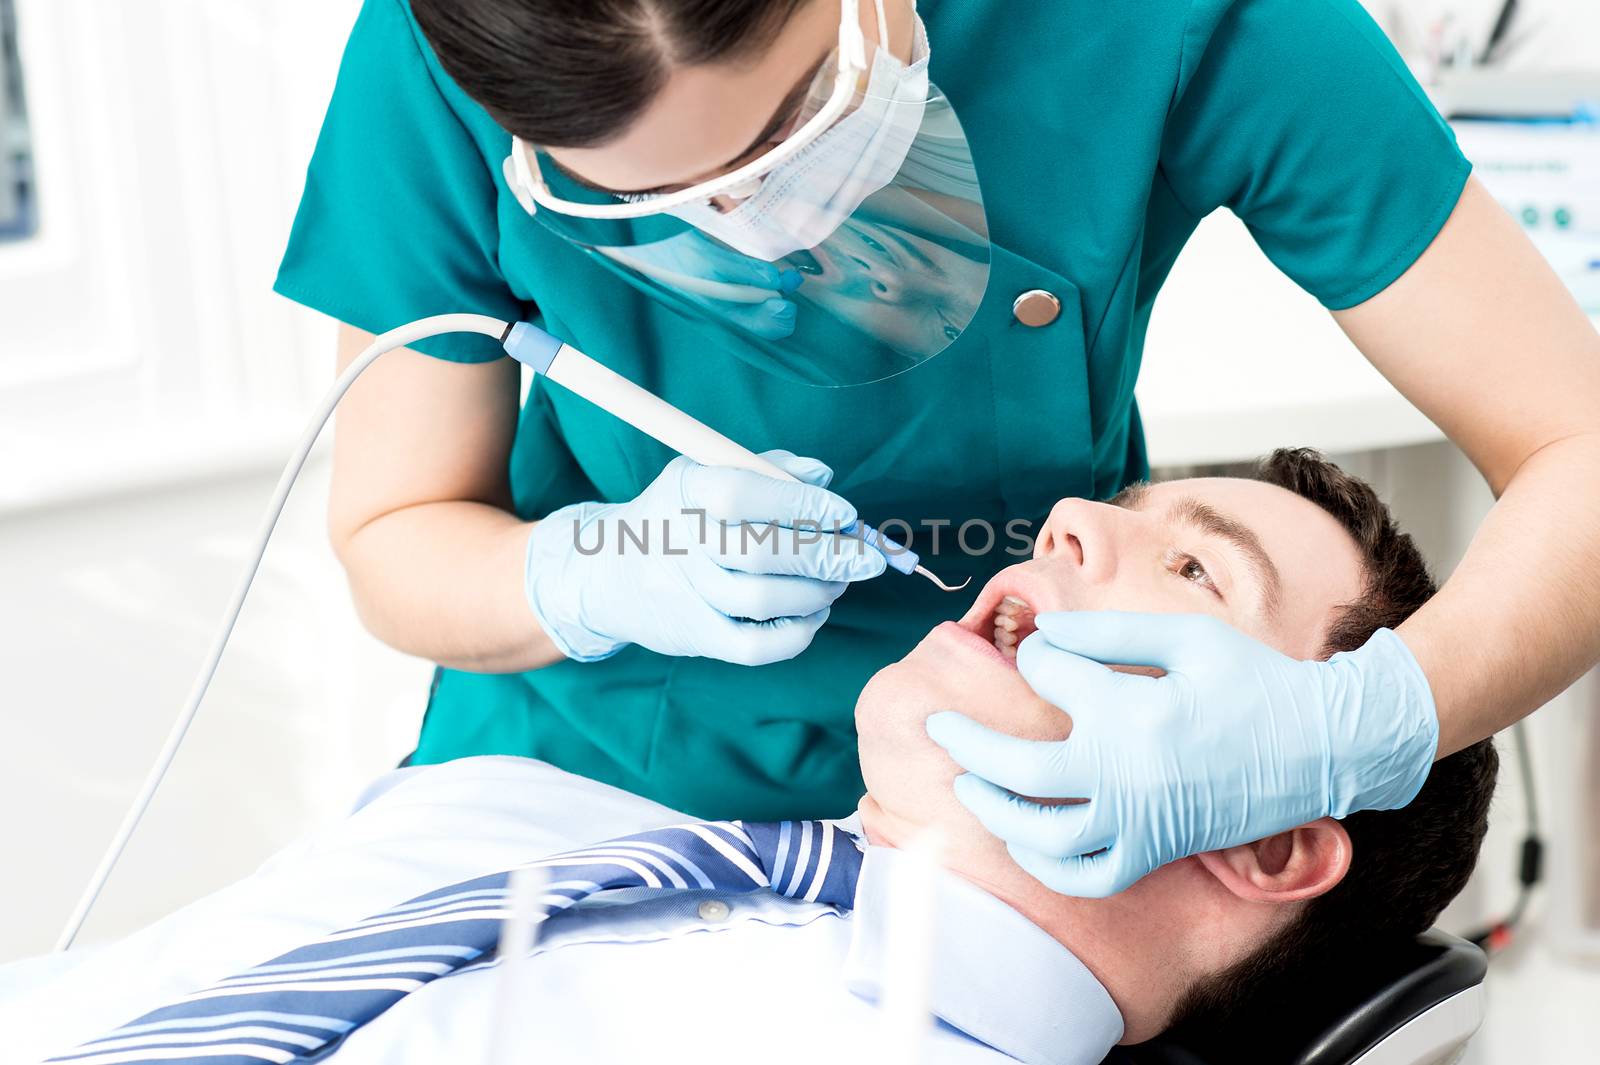 Male with open mouth during oral checkup at dentist